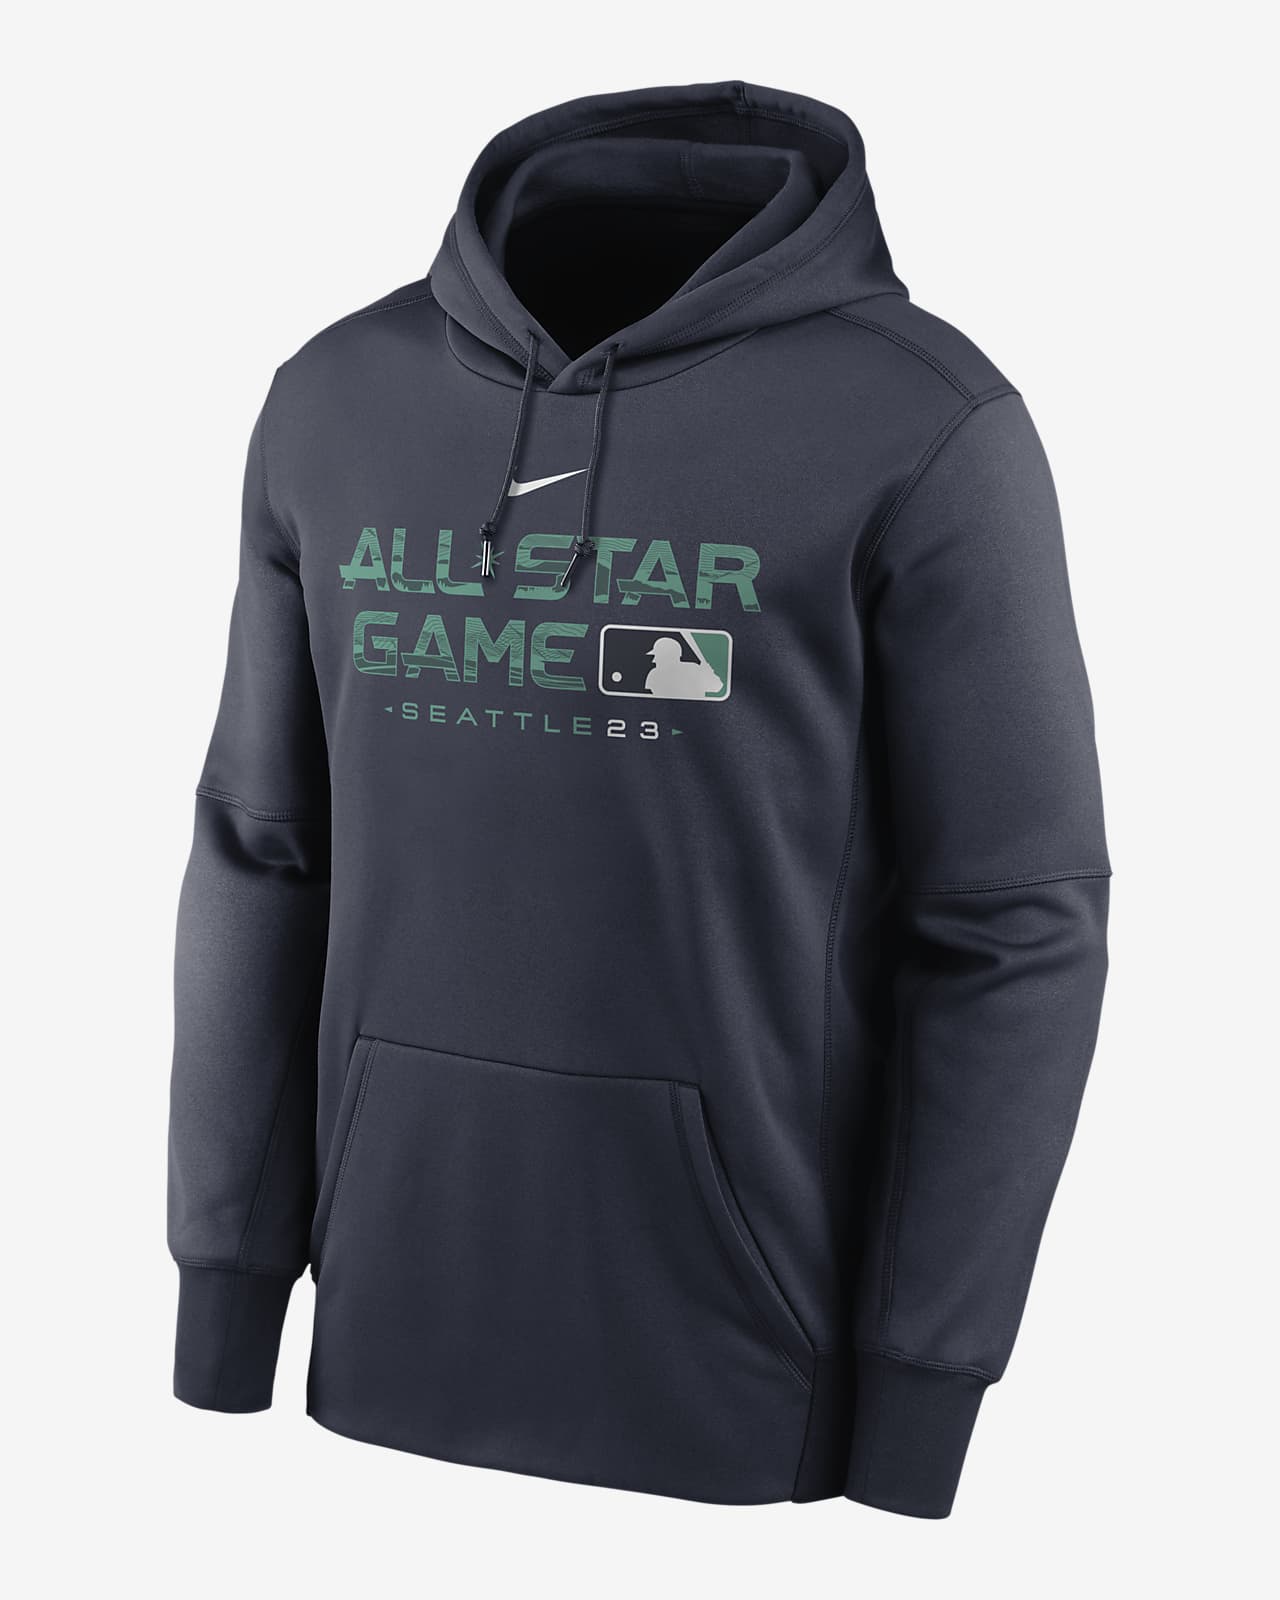 2023 All-Star Game Player Men's Nike Therma MLB Pullover Hoodie